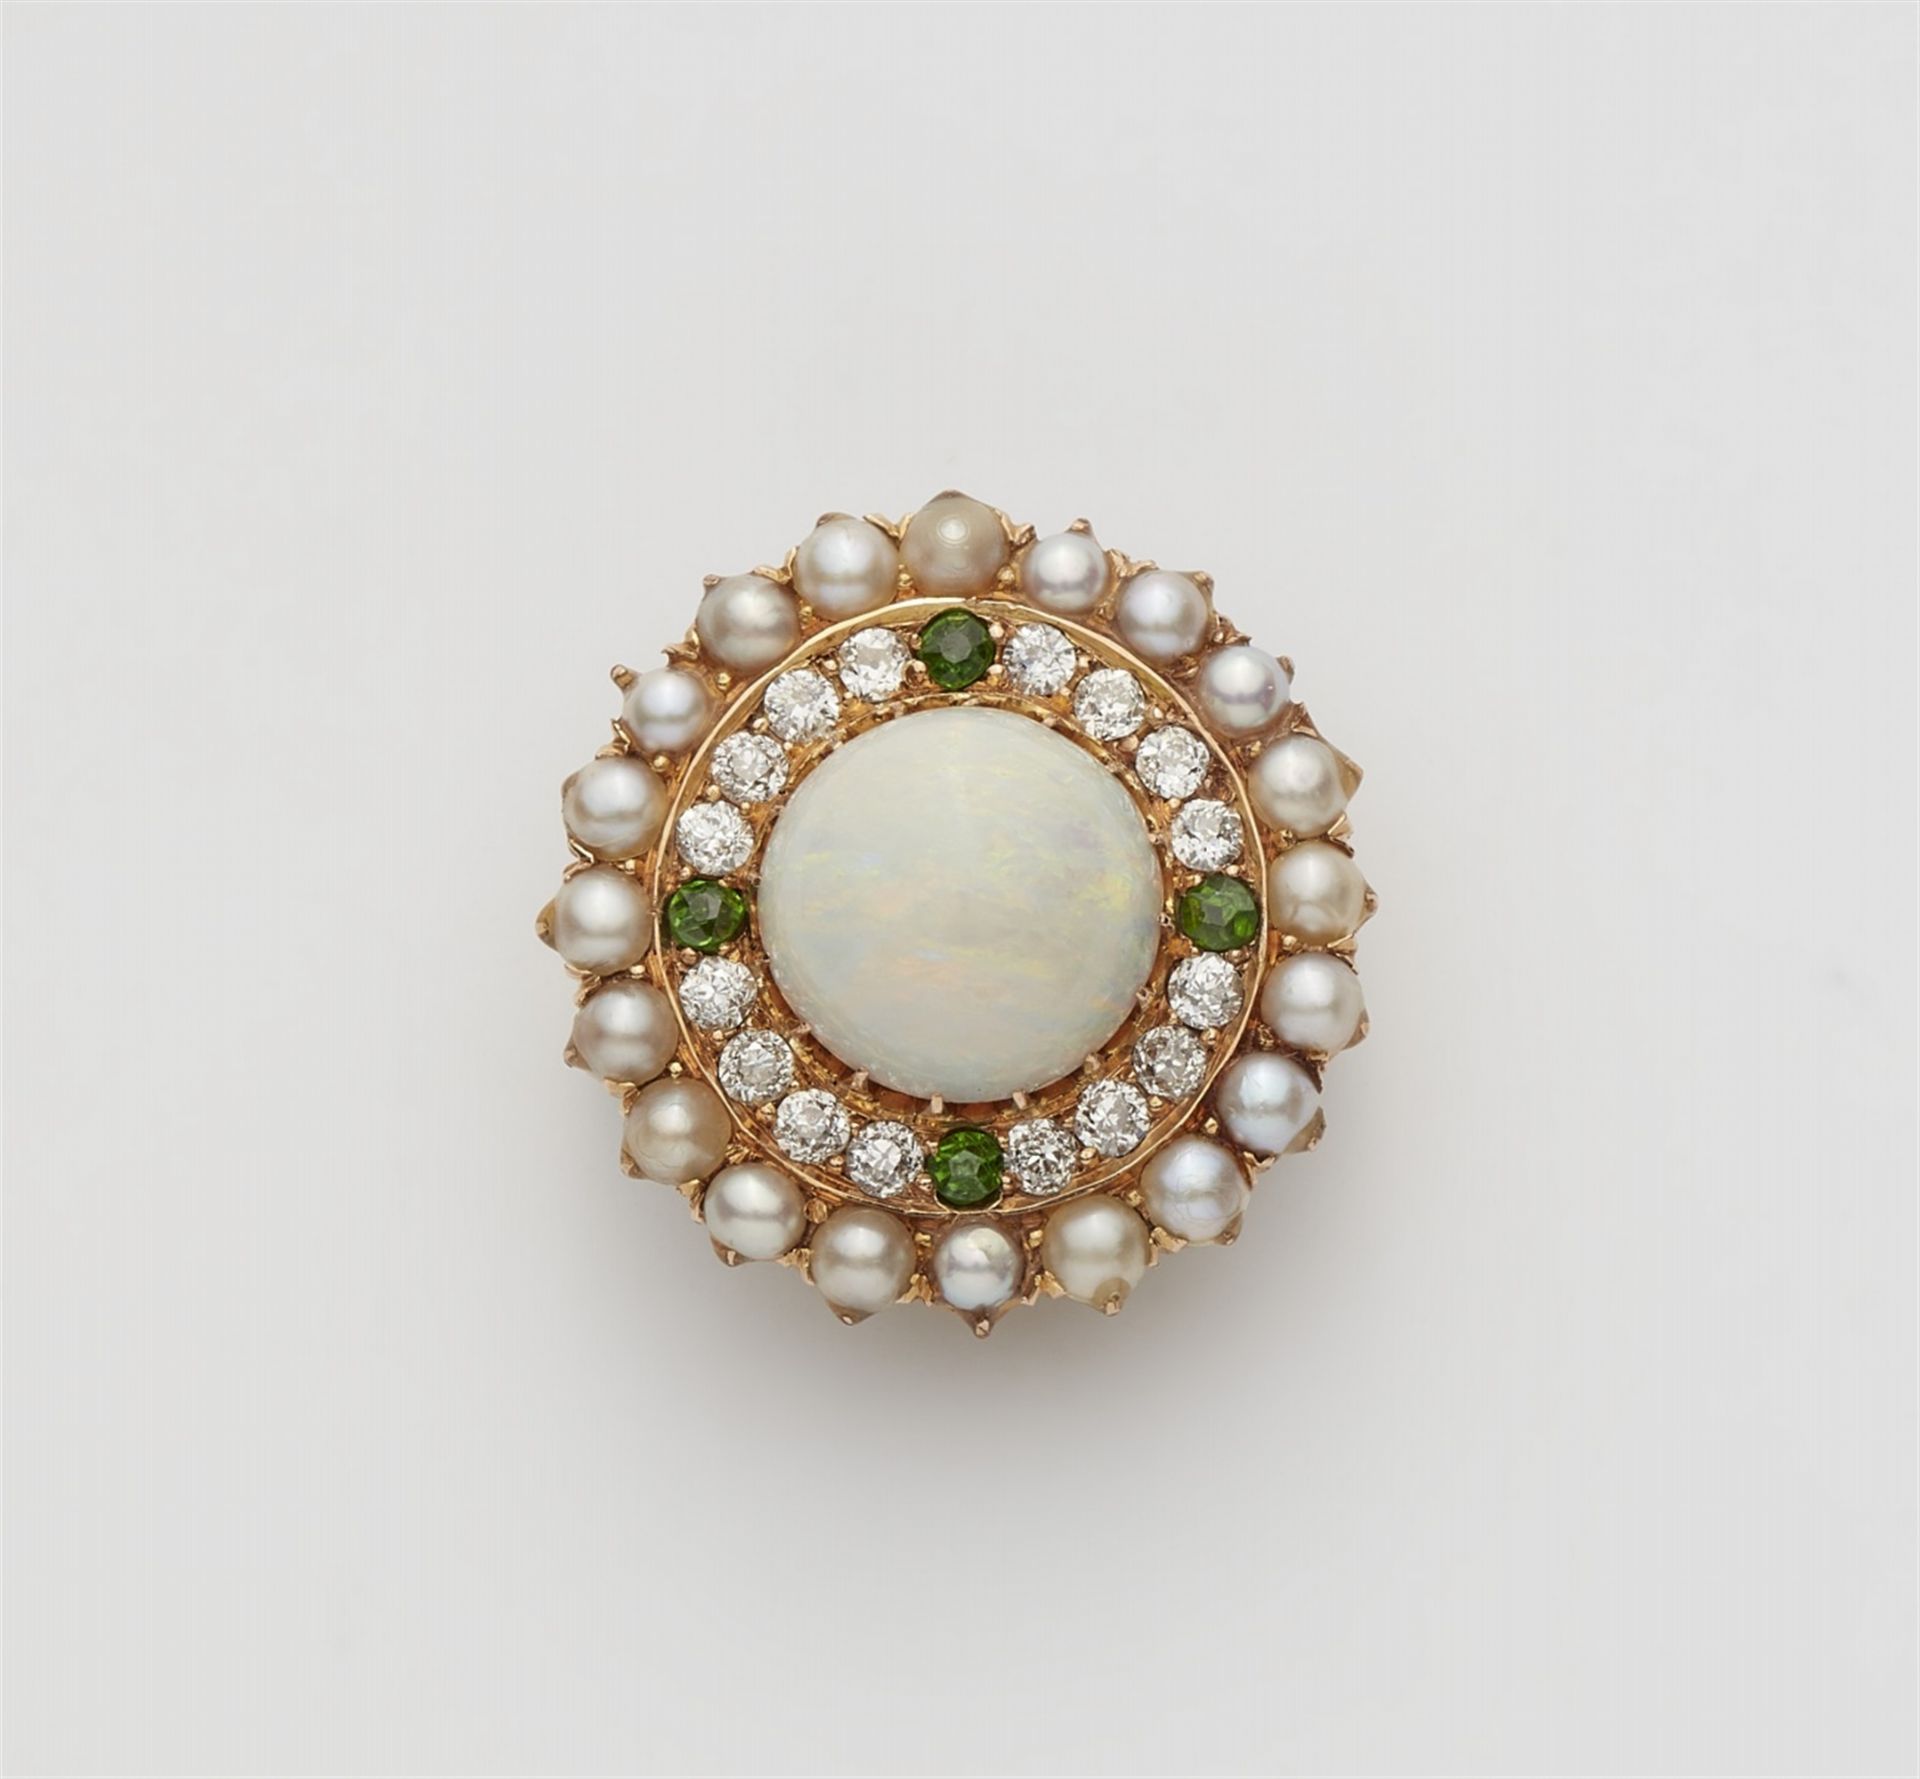 A 14k red and yellow gold opal rosette brooch